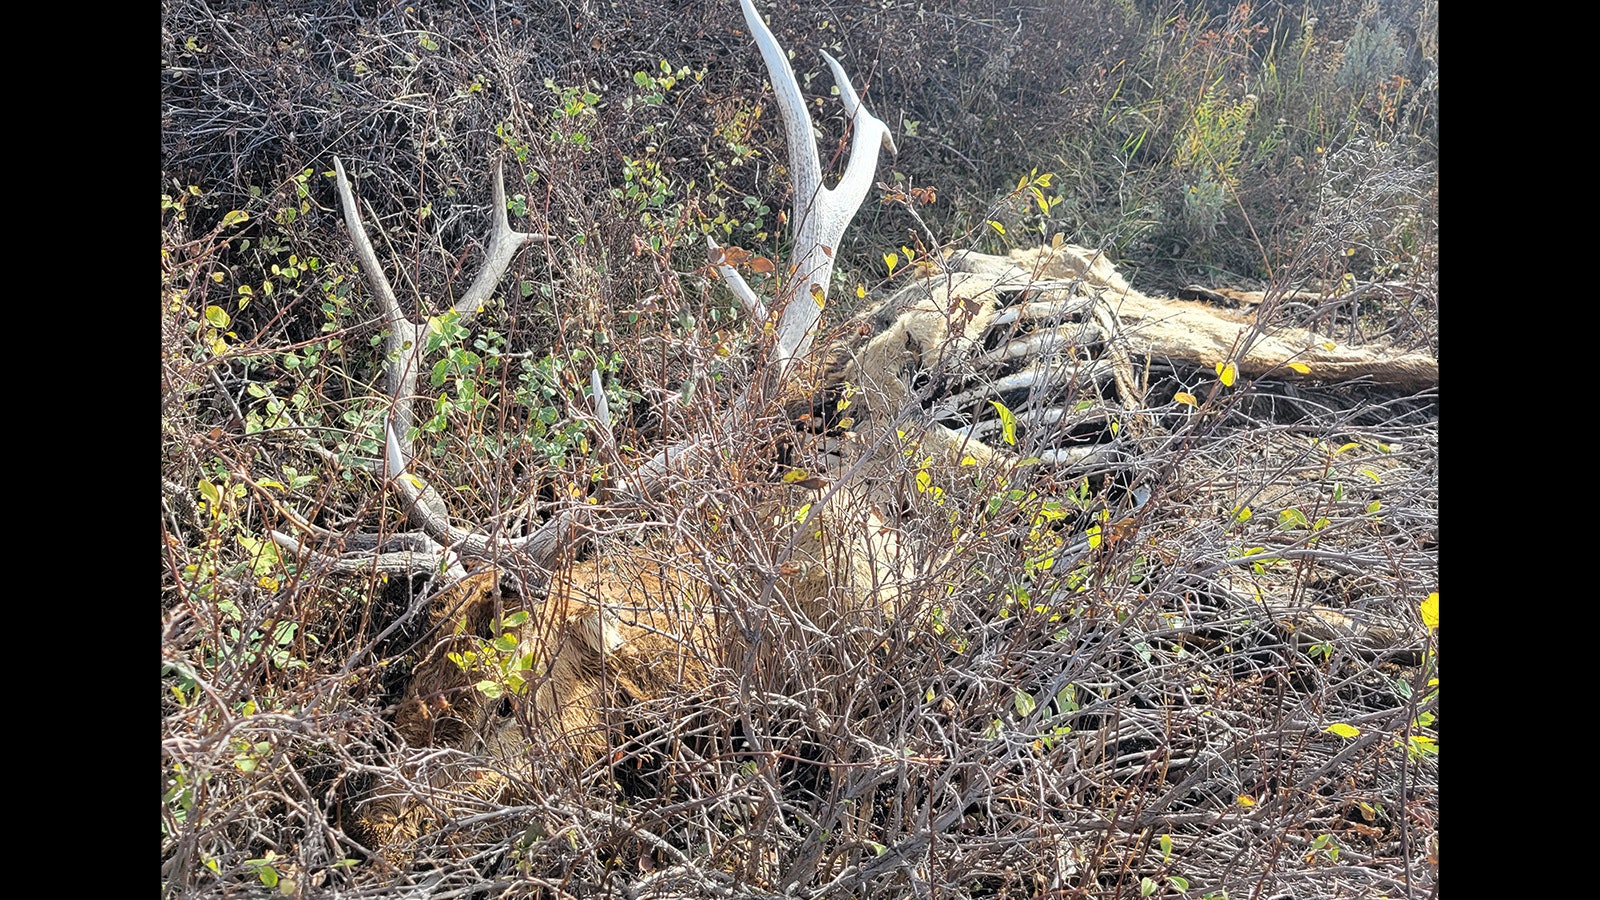 This elk carcass was one of many winterkill animals that Wyoming hunter Vance McGahey found in Lincoln County.